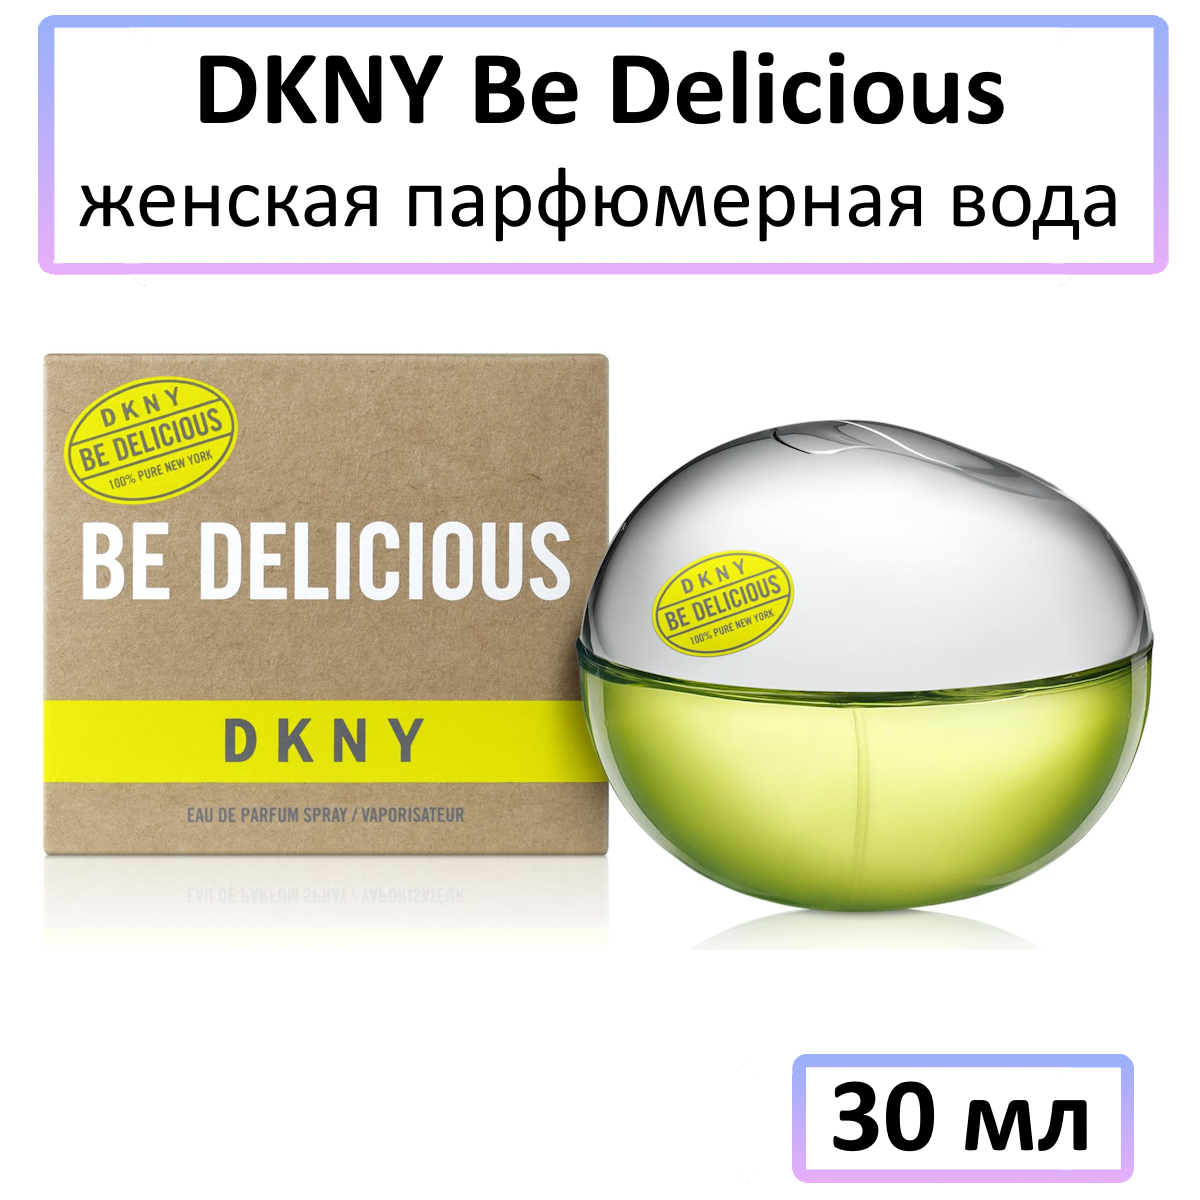 DKNY Be Delicious - женская парфюмерная вода, 30 мл